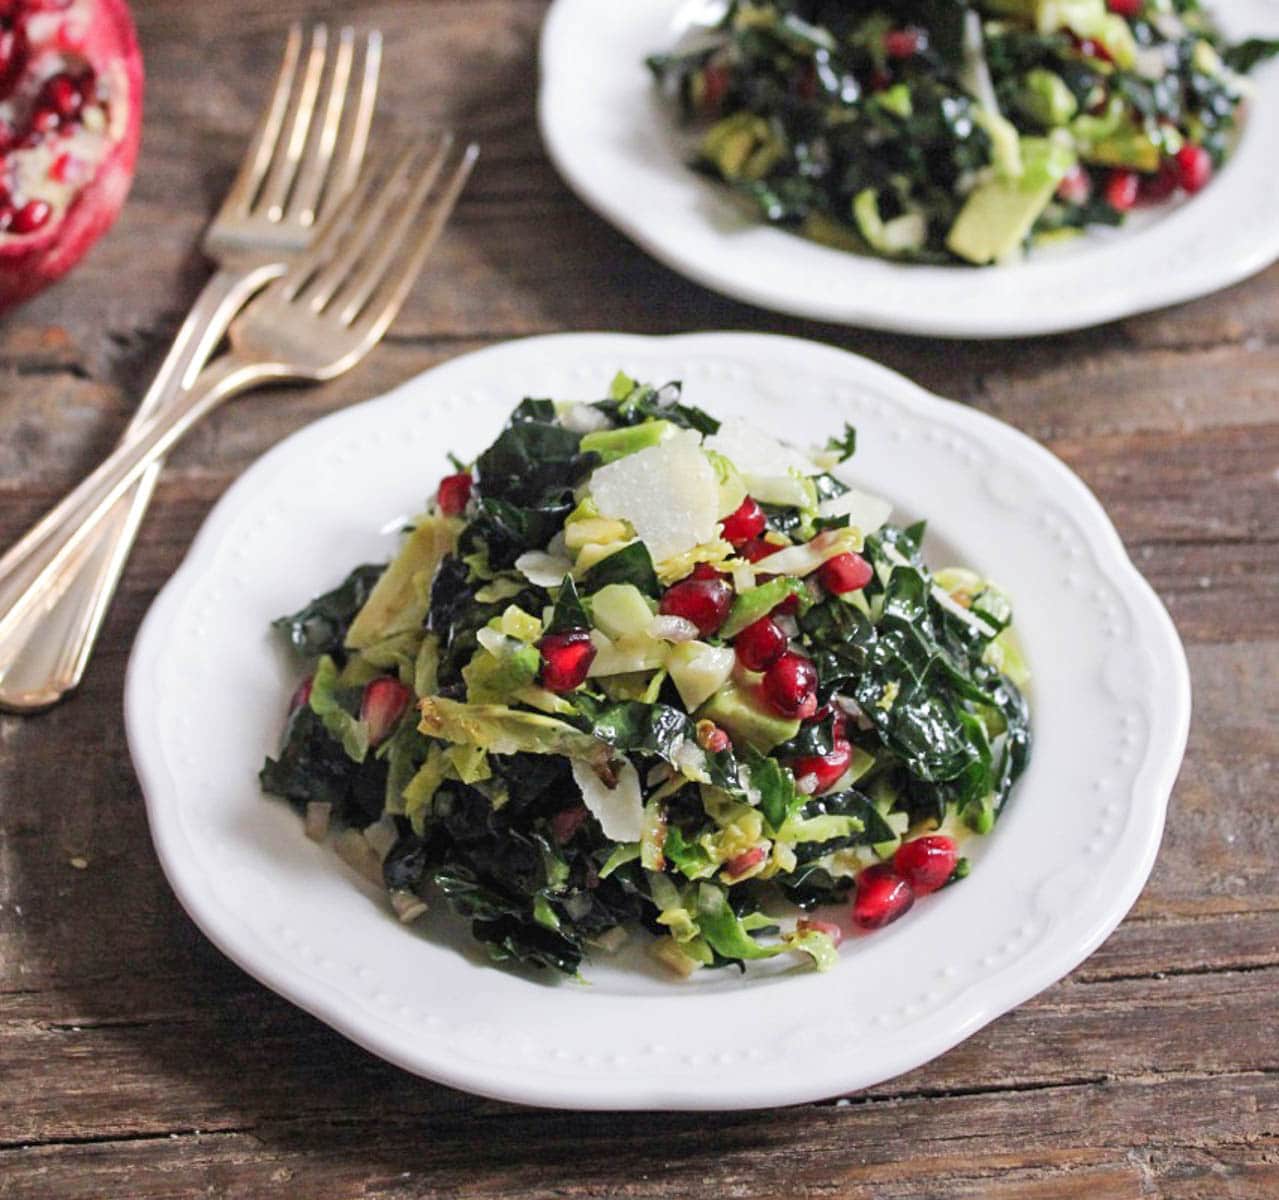 massaged-kale-and-shaved-brussels-sprouts-salad-with-pomegranate-and-avocado-20